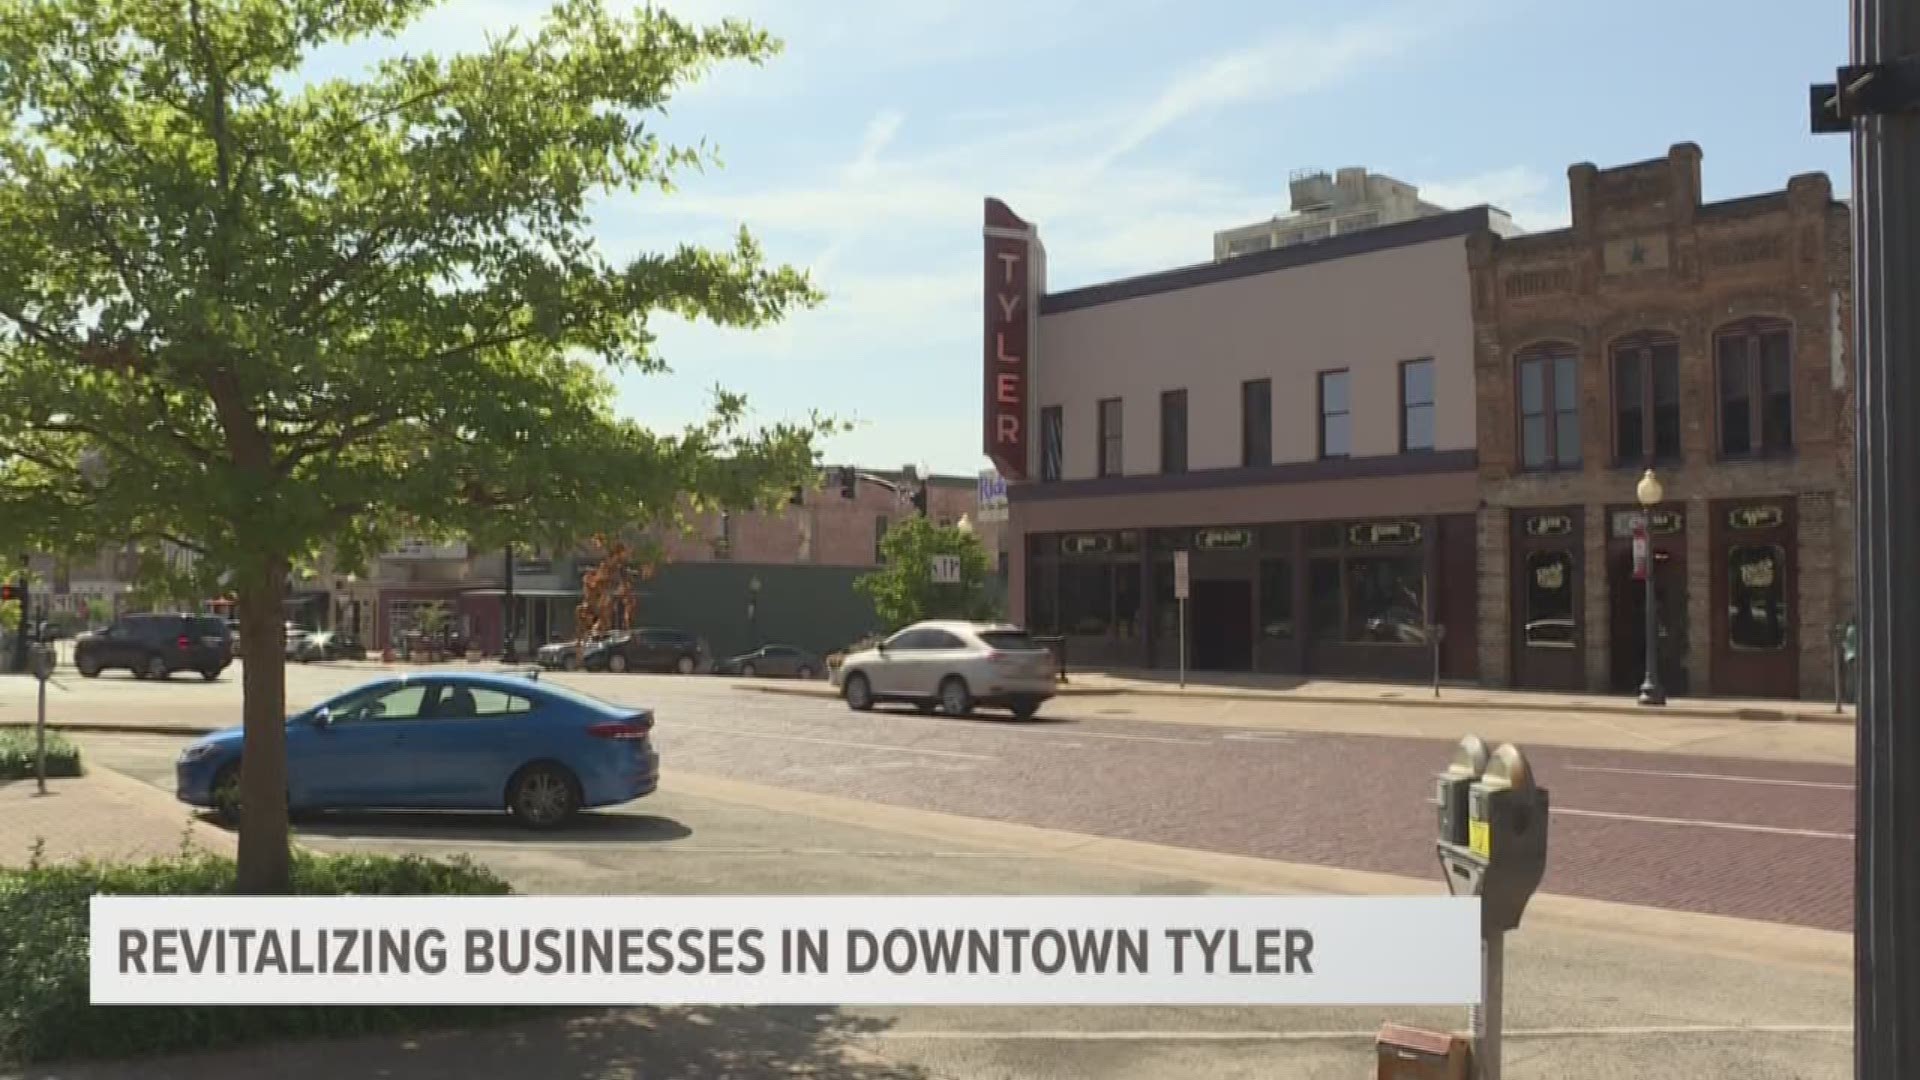 At Wednesday's Tyler City Council meeting, the council members will vote to approve a downtown revitalization grant program for the 2019-2020 fiscal year.